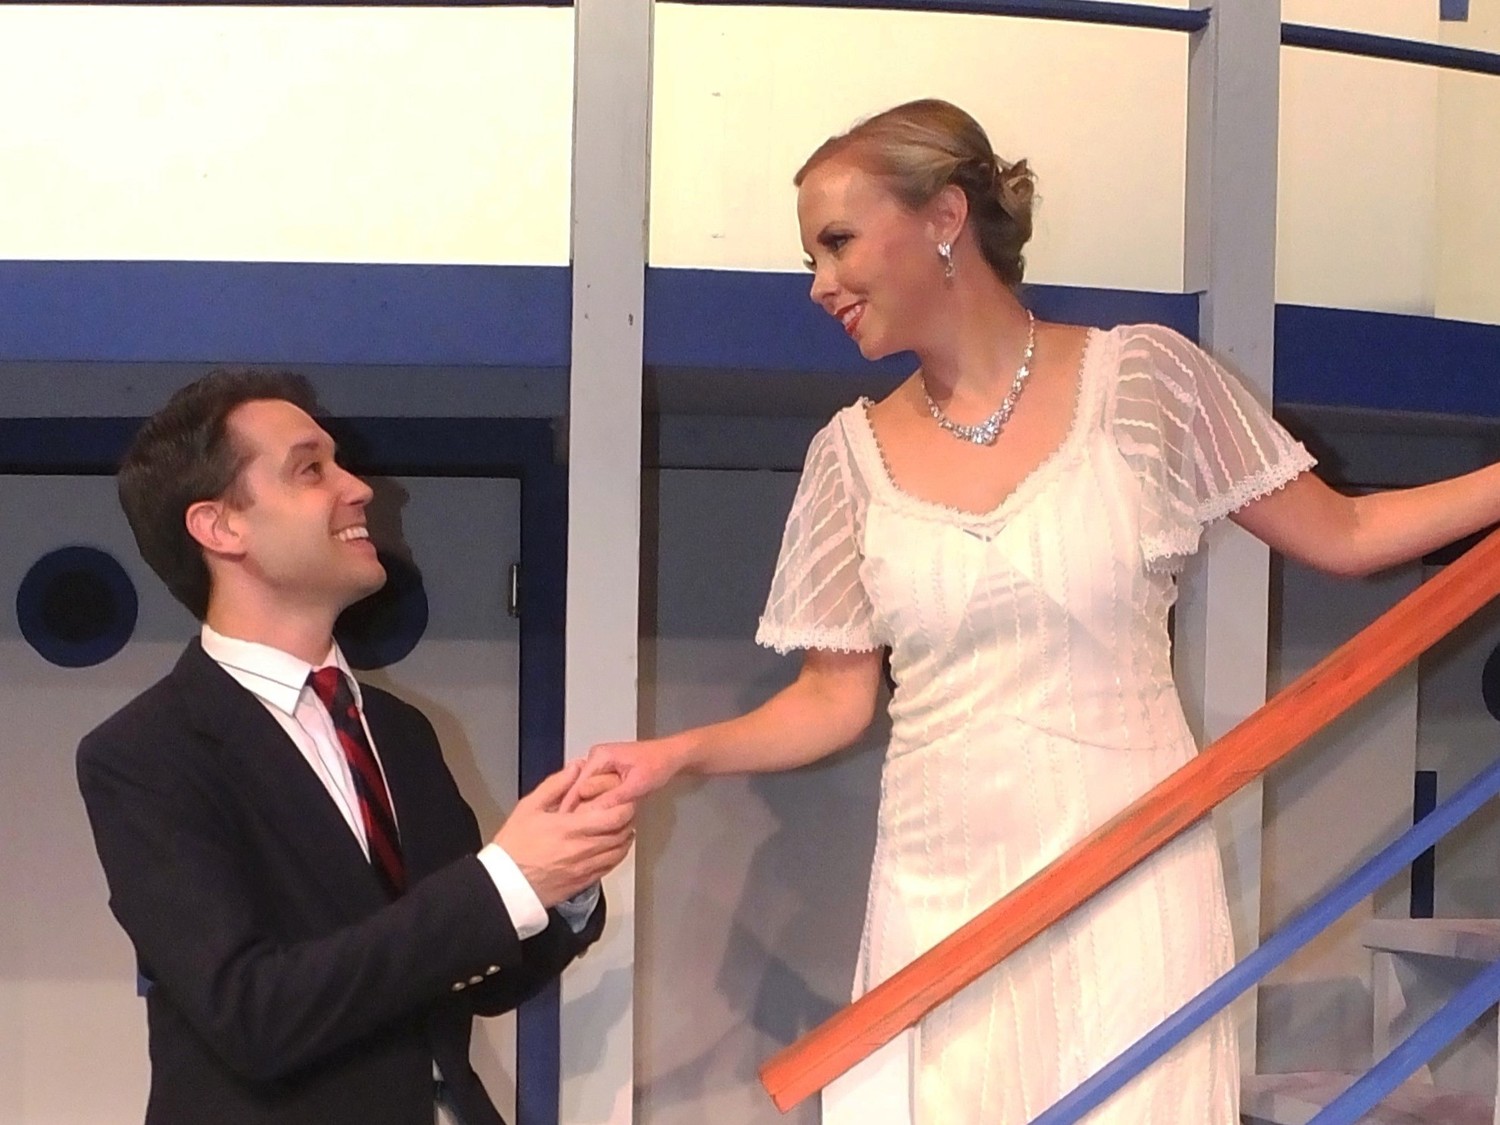 Anything Goes” aboard this mad cap ocean liner as Reno Sweeney (Danielle Caralis of Birmingham) leads the antics in Cole Porter’s musical Anything Goes. Or Reno Sweeney (Danielle Caralis of Birmingham) gets a “Kick Out Of You” in Cole Porter’s madcap musical Anything Goes. 3